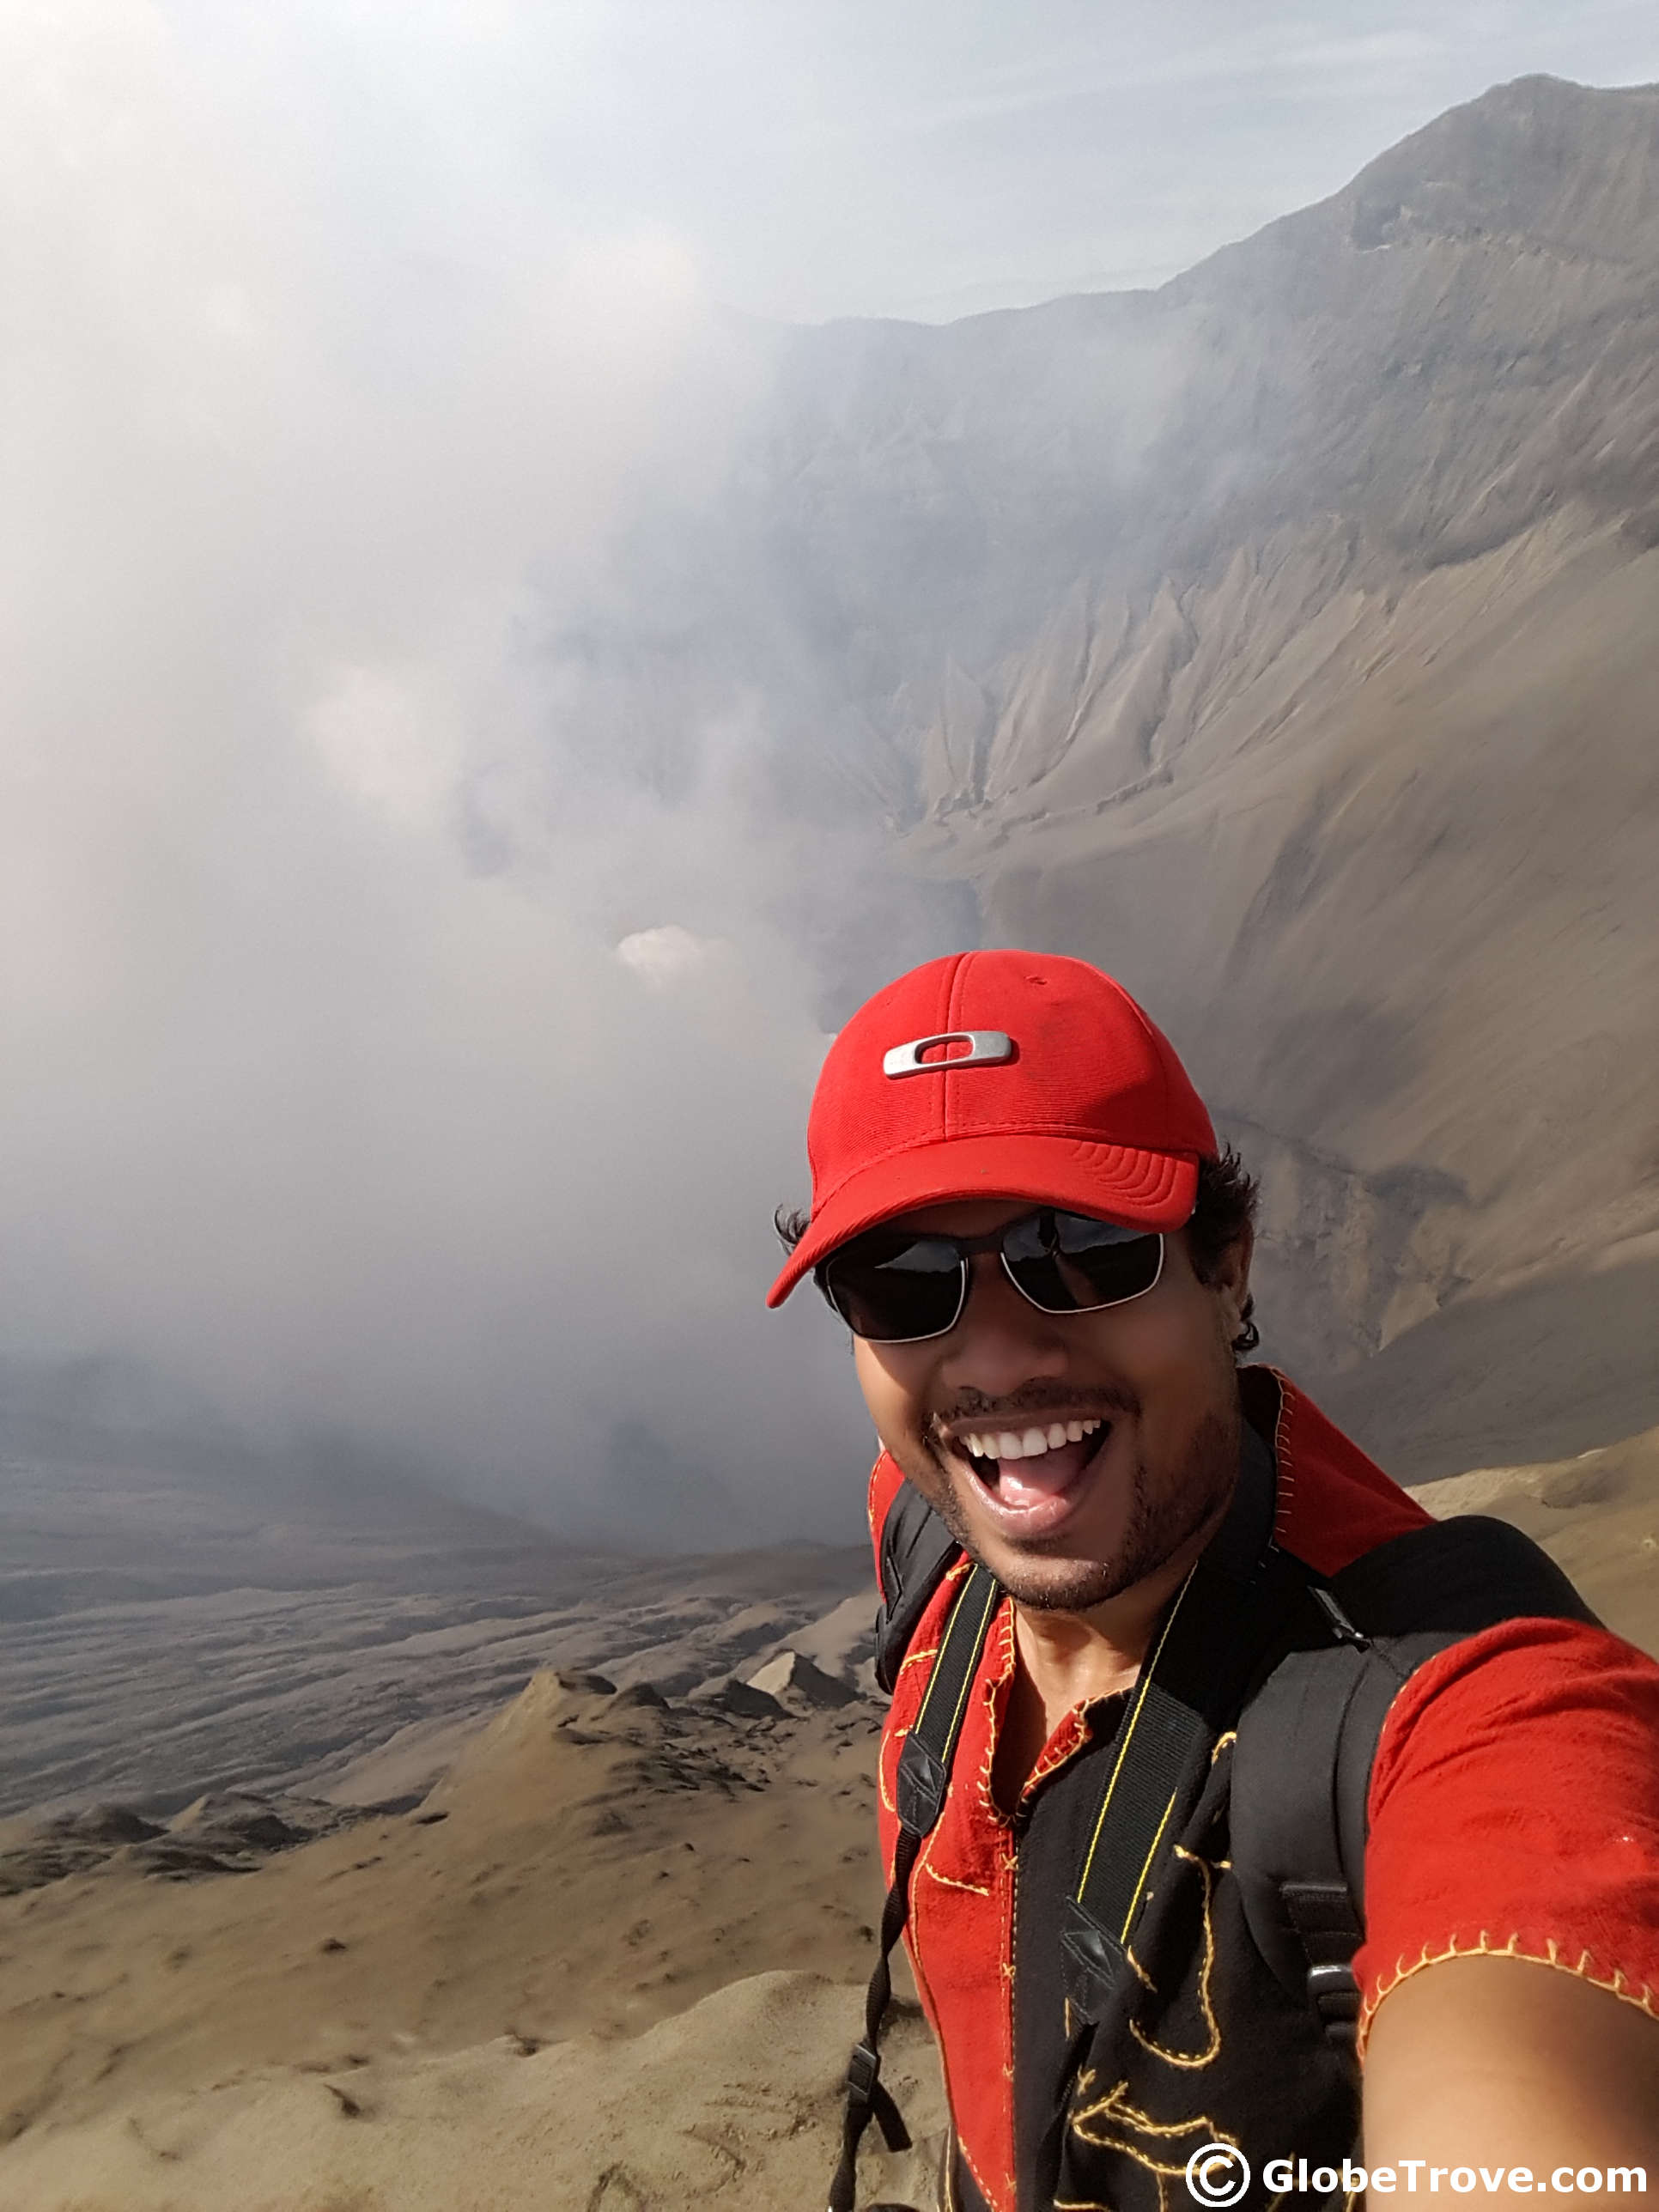 If you want to really experience the might of a roaring volcano treat yourself to a self guided Mount Bromo tour! You won't regret it!